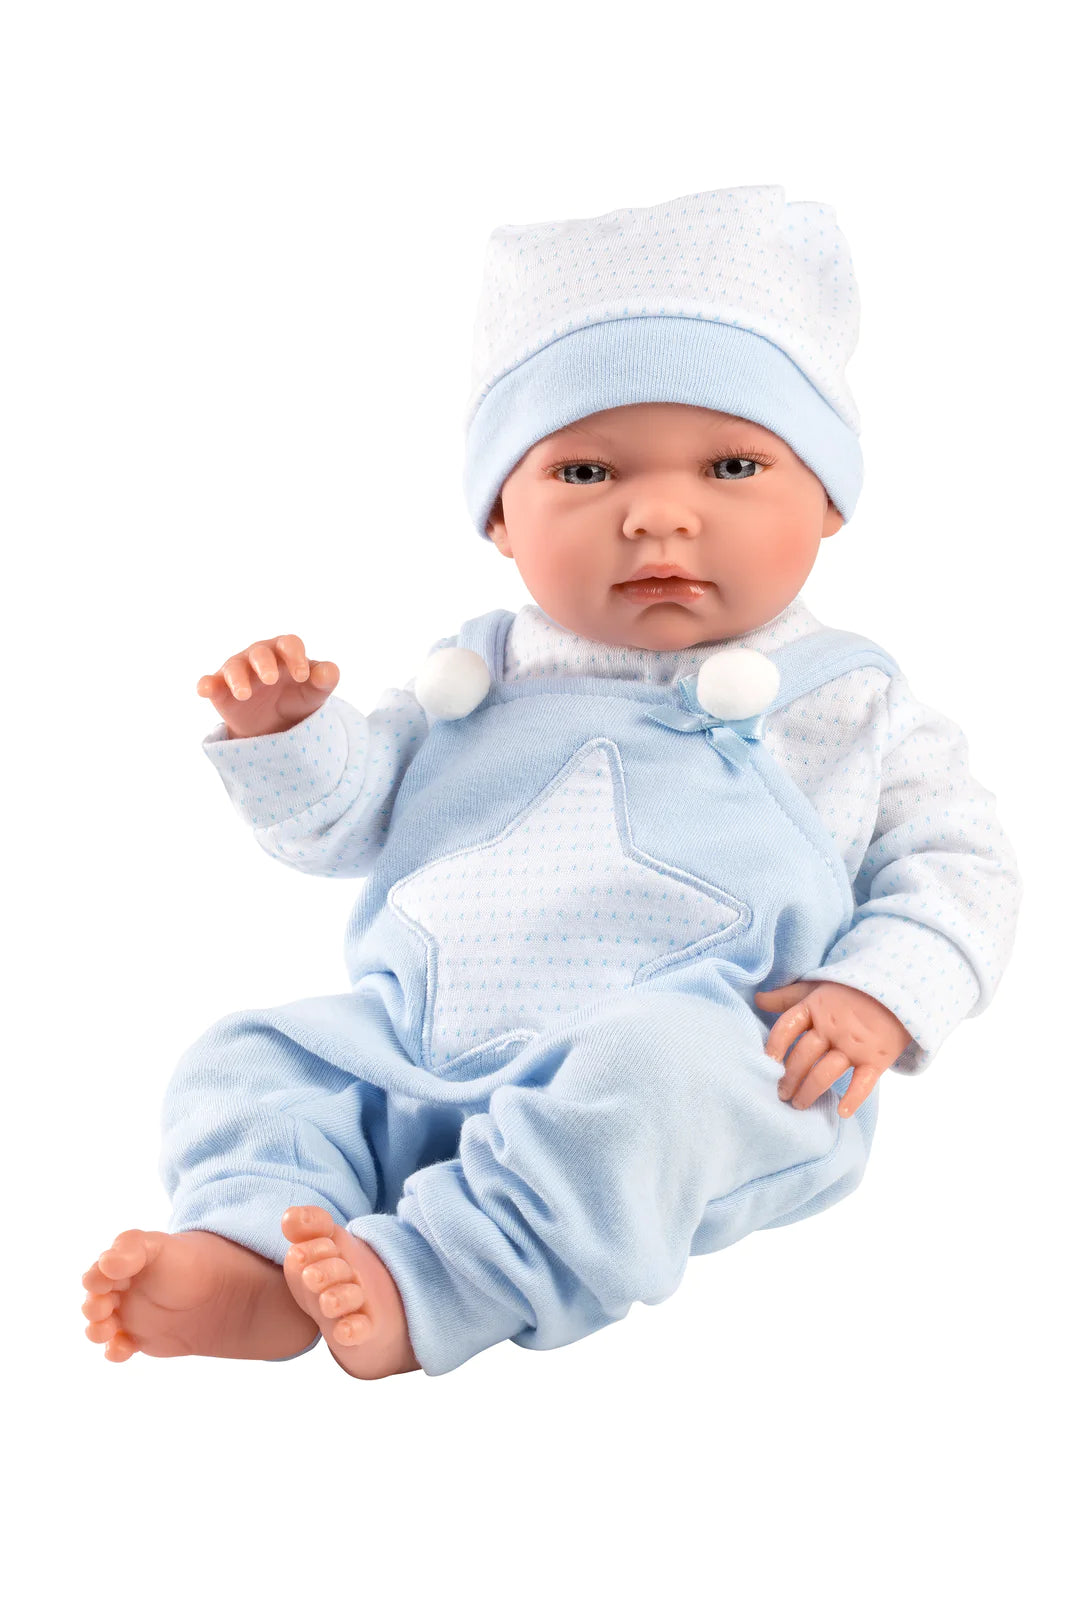 V-7380 Dolls Clothing - Blue Outfit